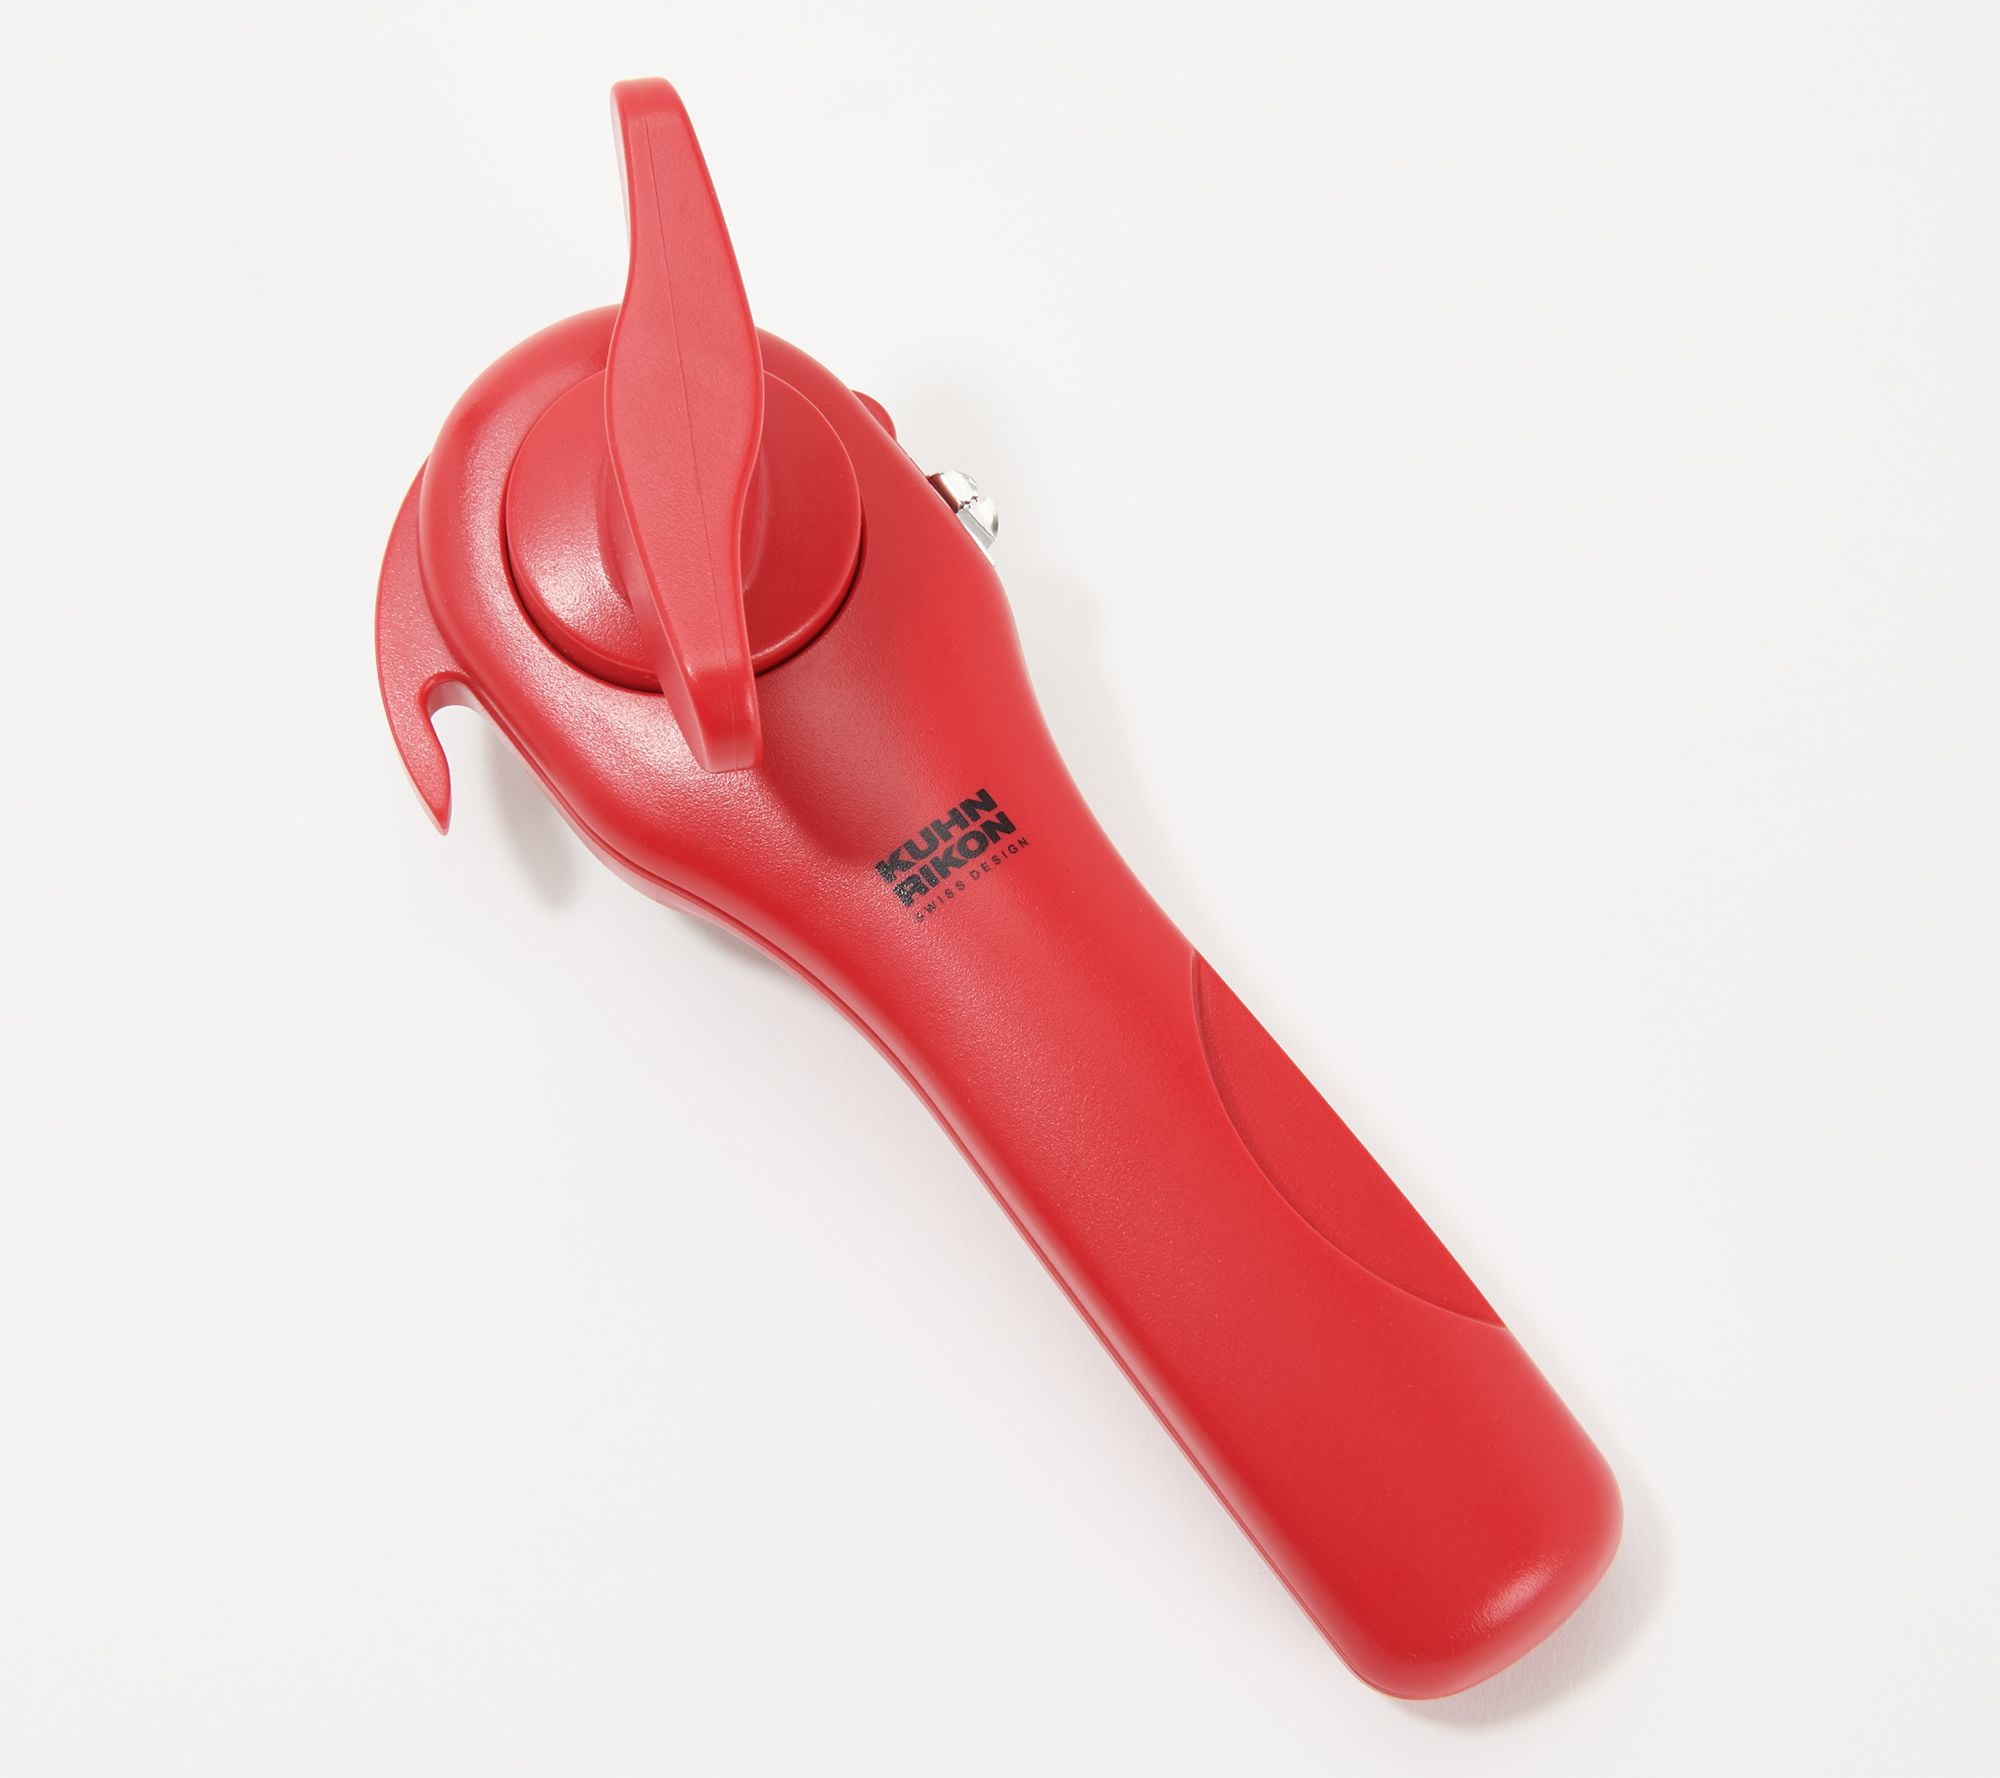 Kuhn Rikon 2-in-1 Safety Can Opener with Pull Tab Model K50211